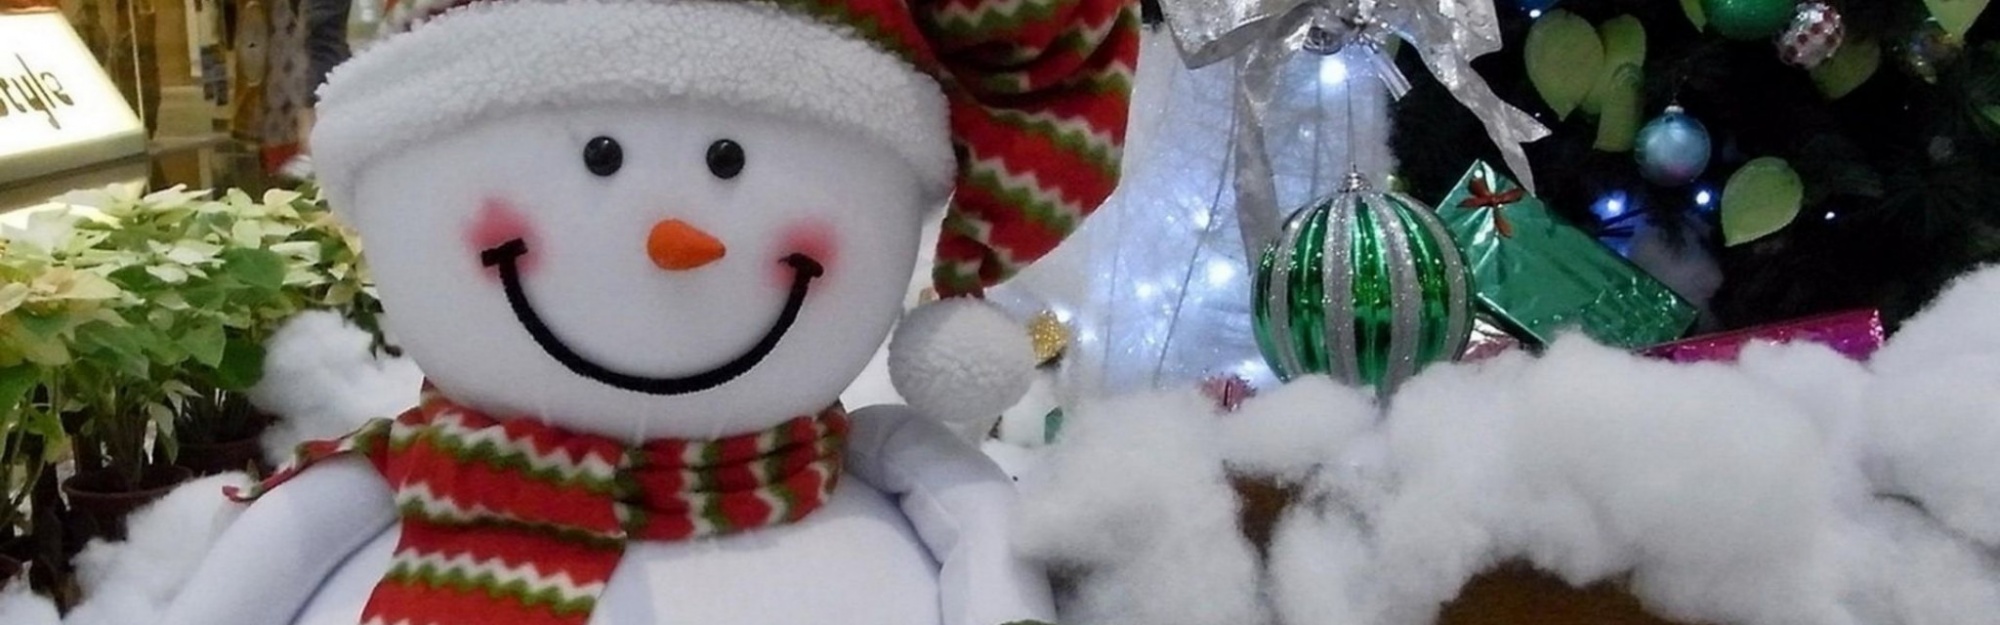 Snowman Smiling Cotton Tree Presents Christmas New Year Holiday